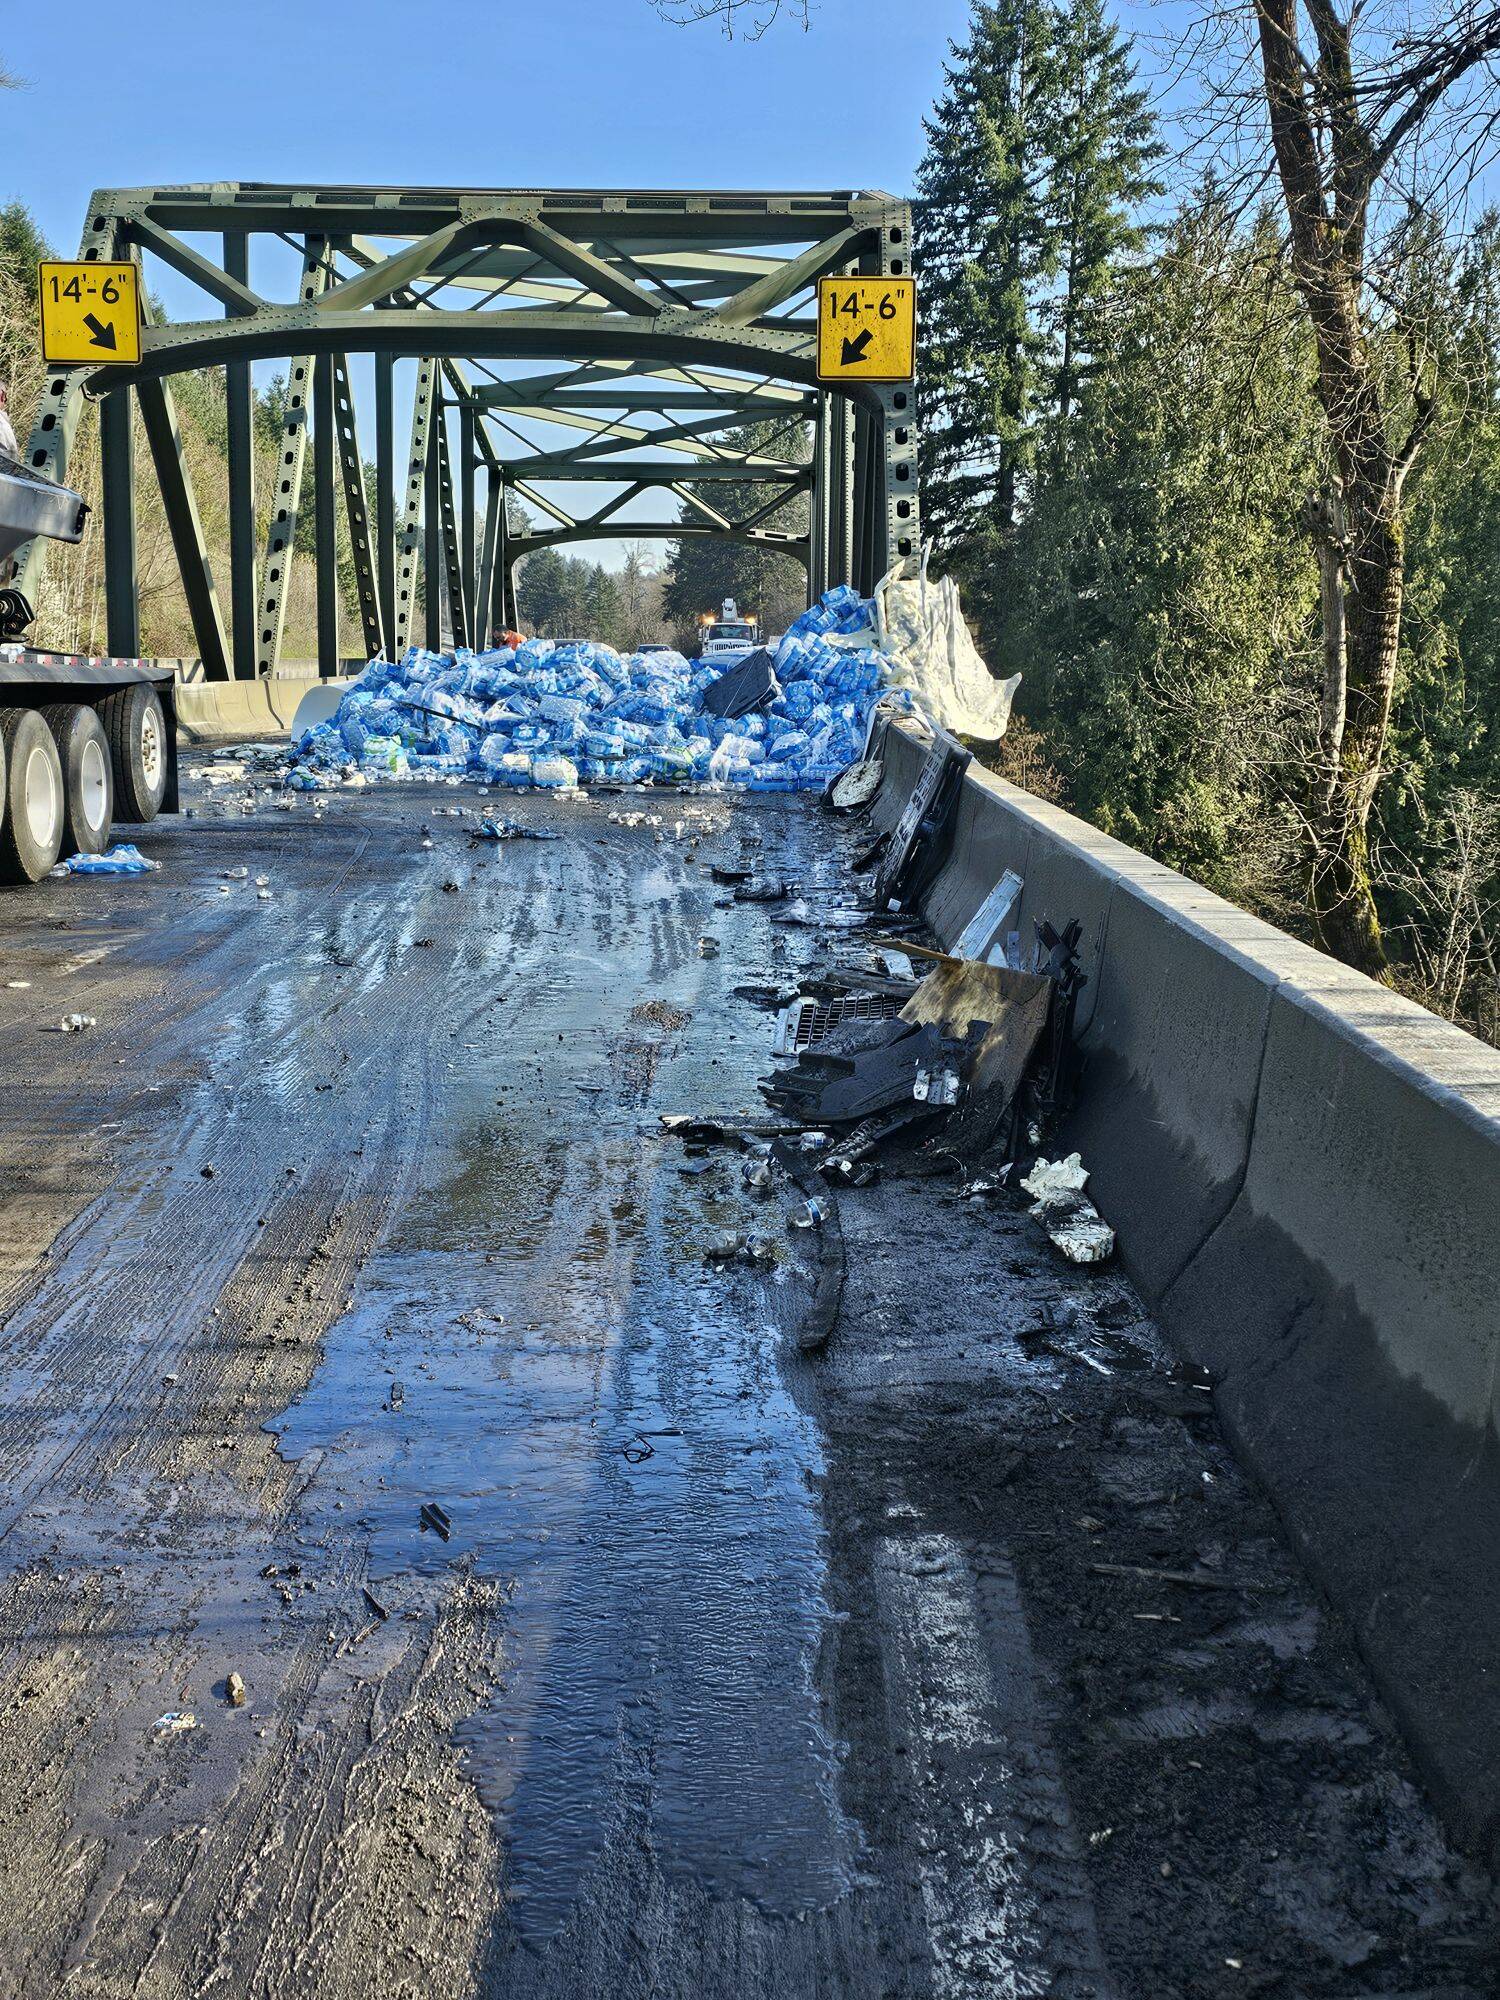 The scene of the semi-truck collision posted at 11:17 a.m. (Courtesy of Washington State Department of Transportation.)